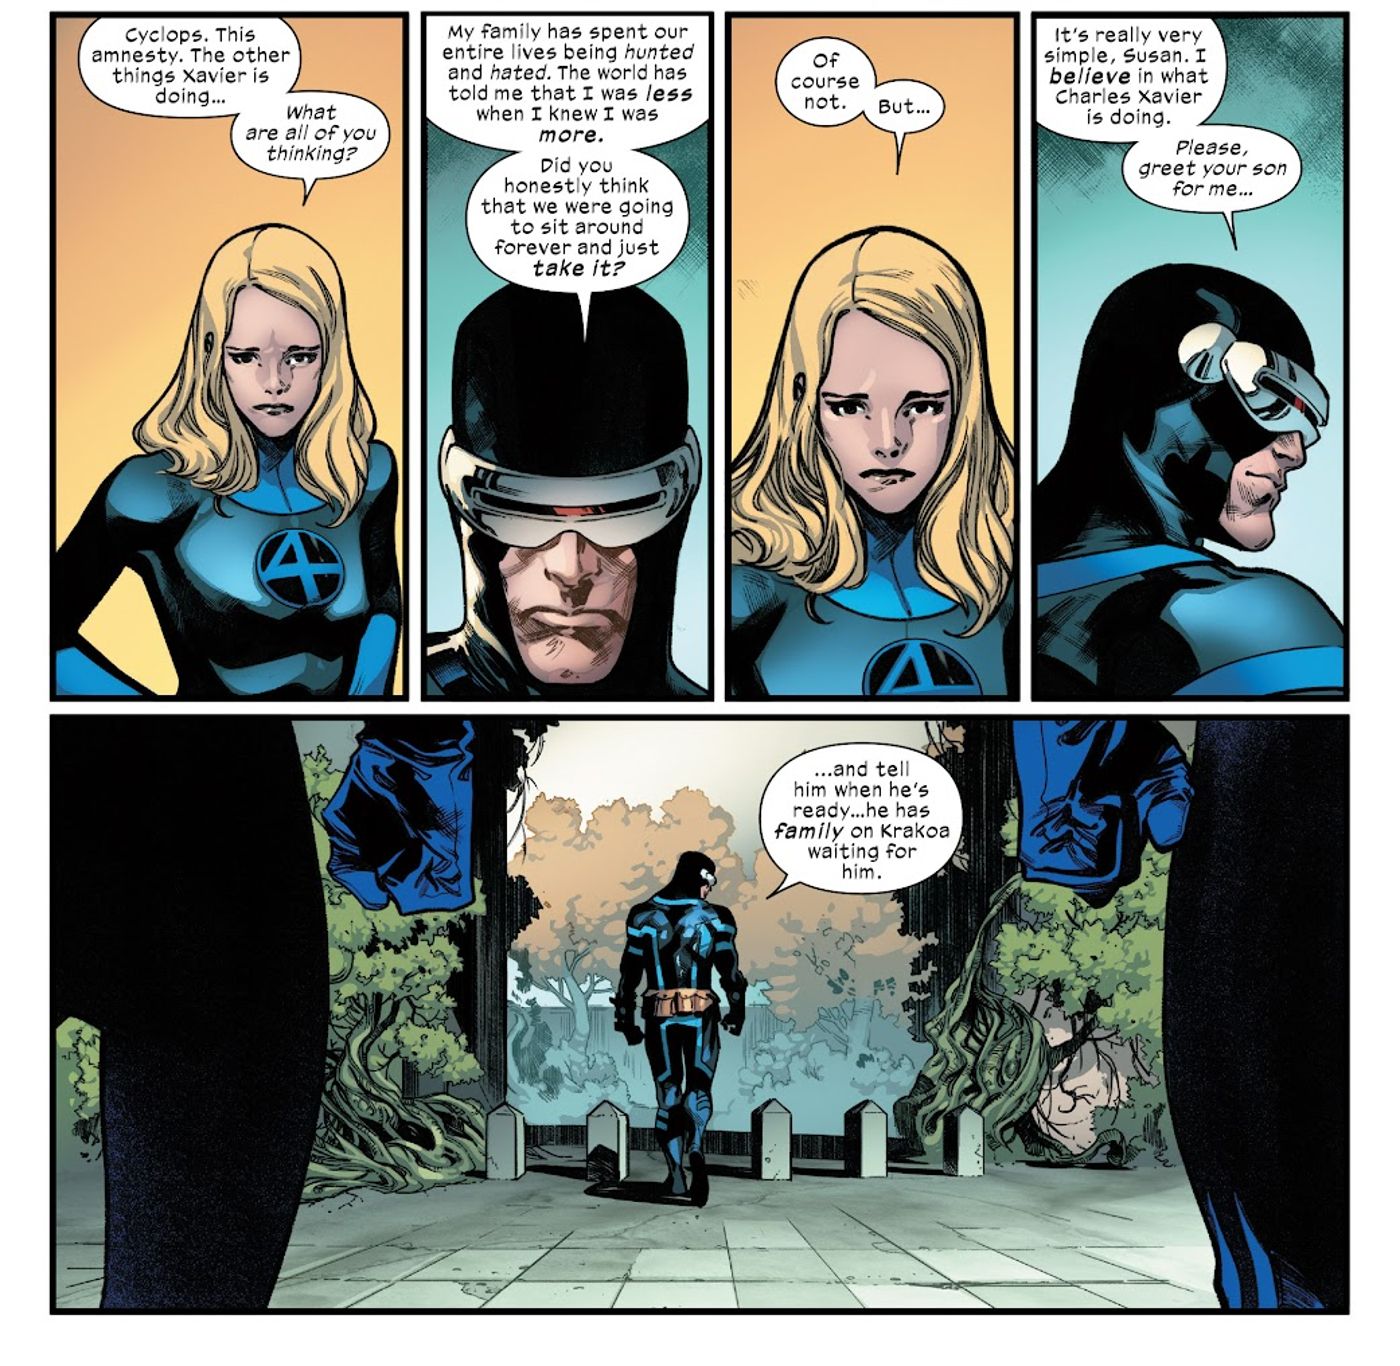 Cyclops and Susan Richards converse about Krakoa and Scott tells her to extend an invitation to her son as he walks away.